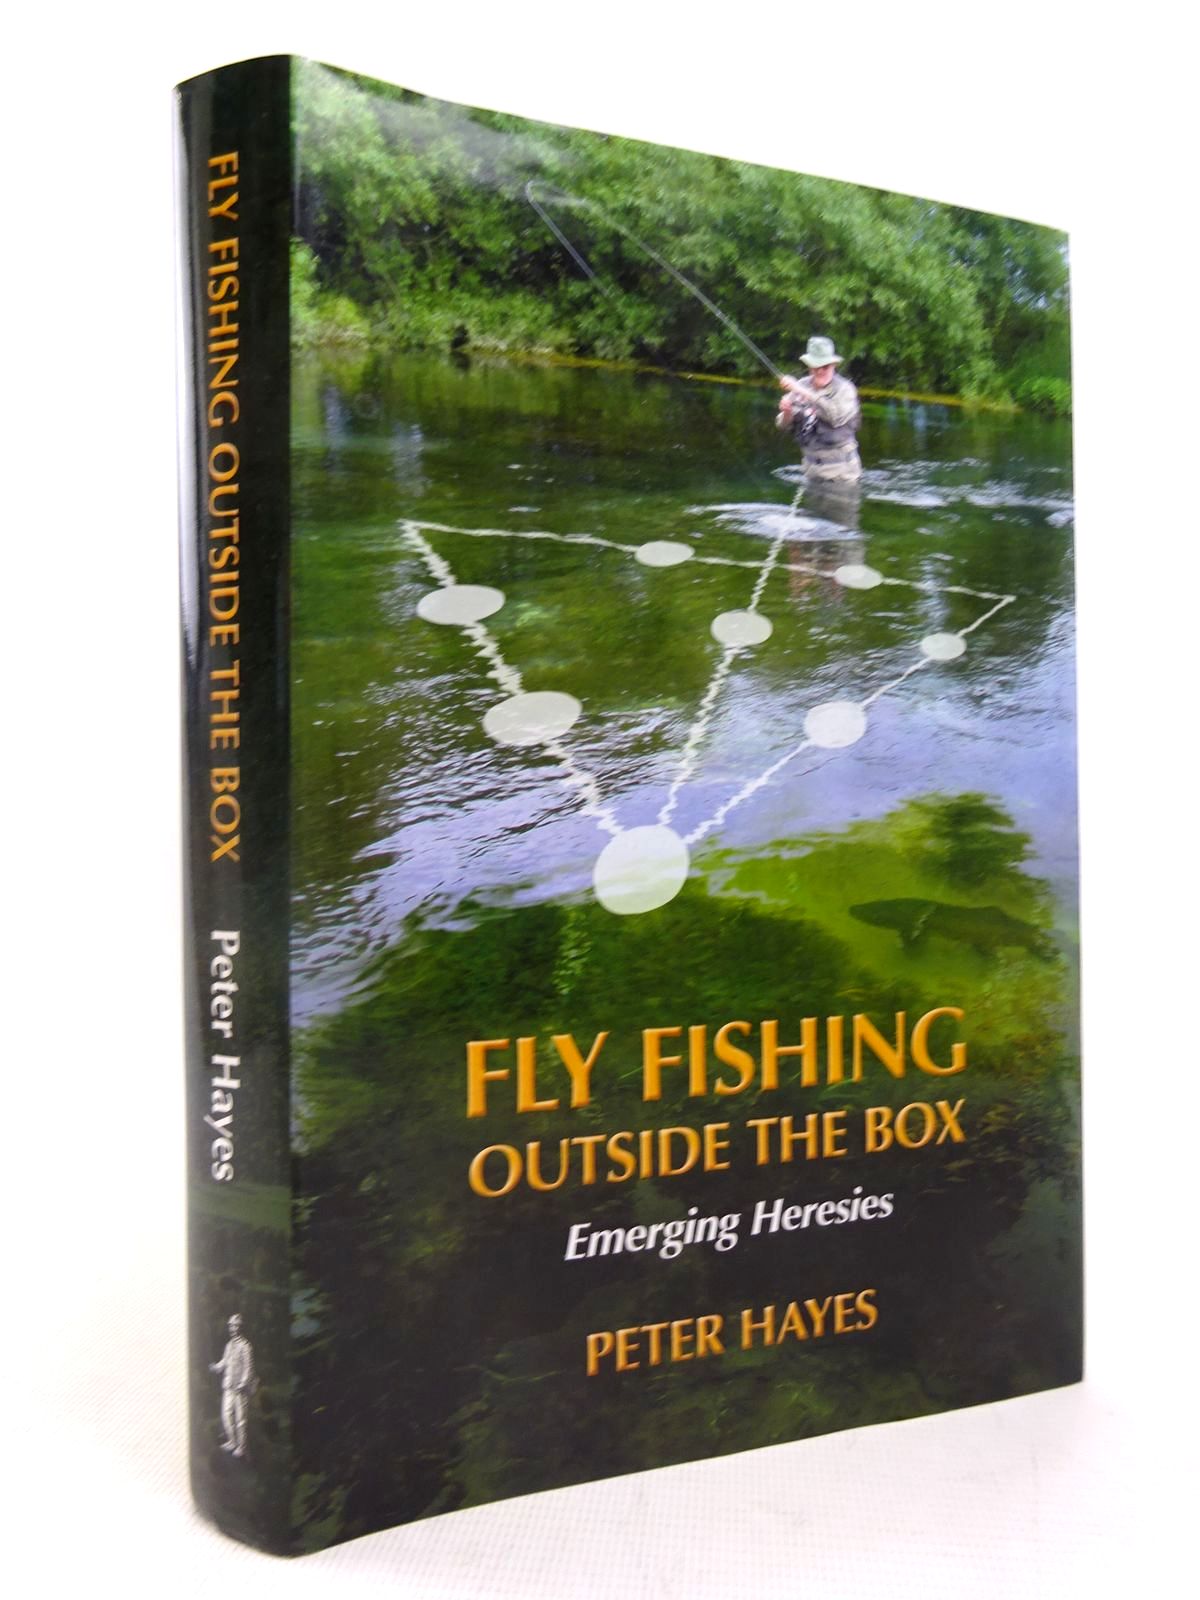 Stella & Rose's Books : FLY FISHING OUTSIDE THE BOX: EMERGING HERESIES  Written By Peter Hayes, STOCK CODE: 1816650